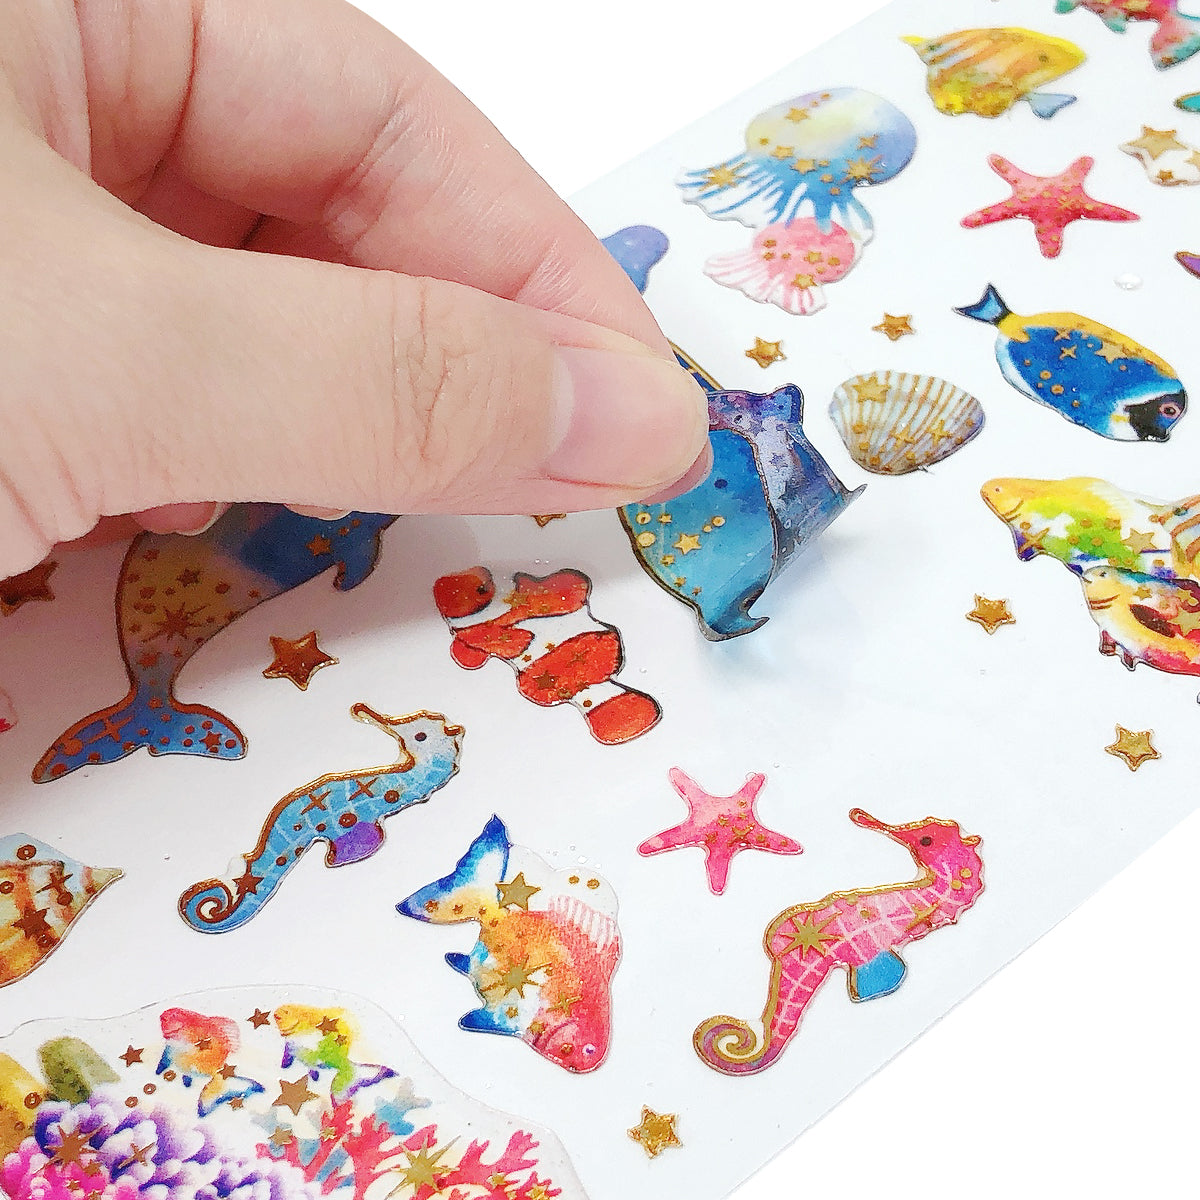 Wrapables 3D Epoxy Stickers for Scrapbooking, Journal, Planner, Decals for Phone or Notebook (4 Sheets)